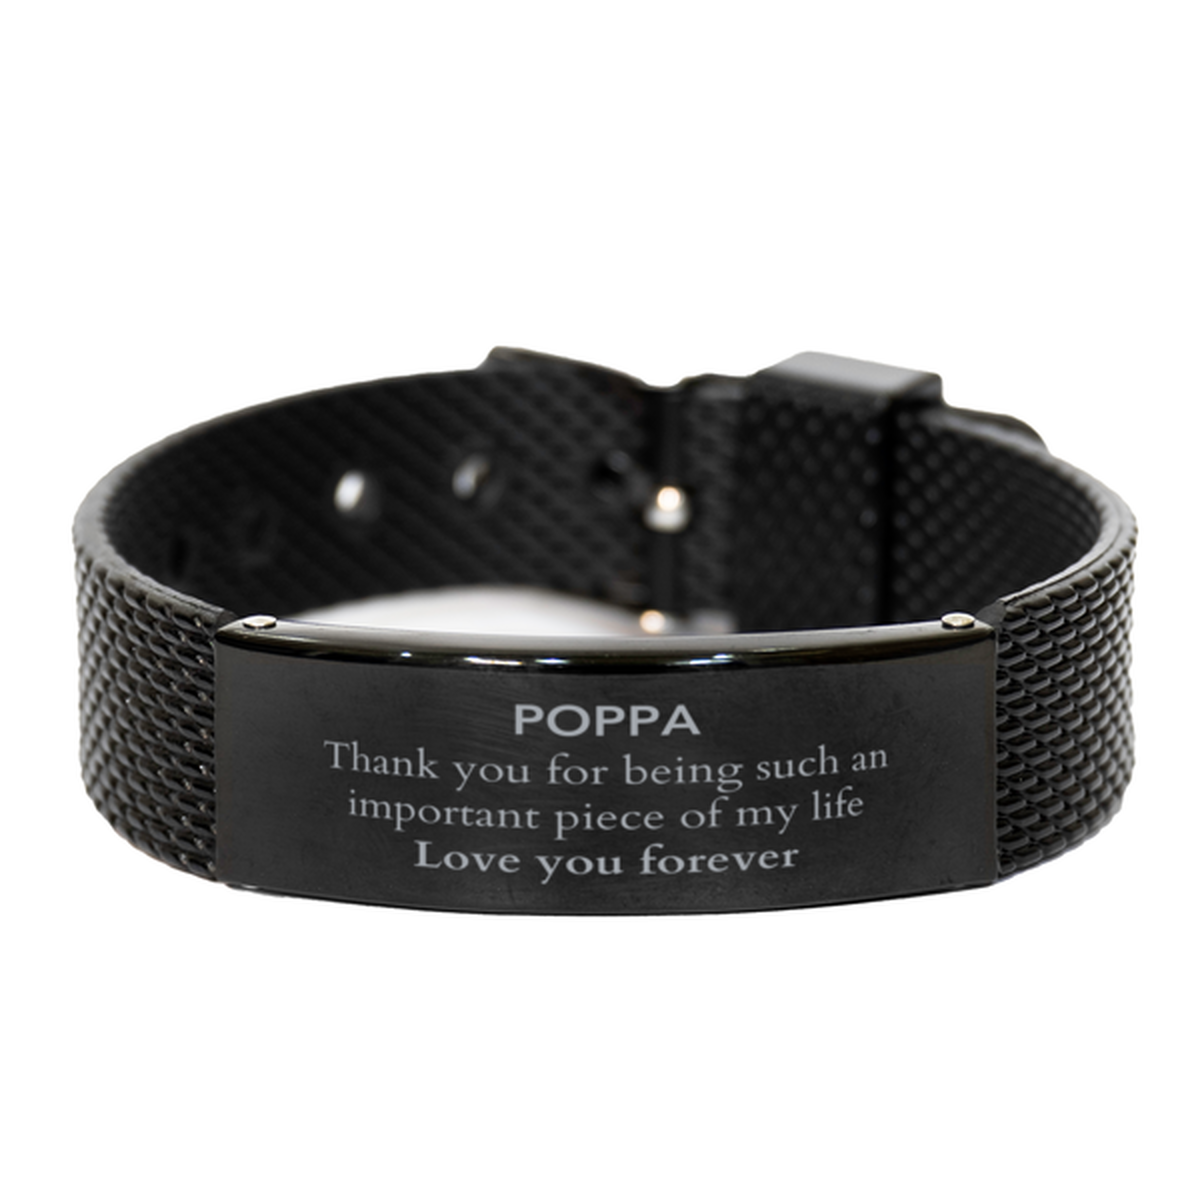 Appropriate Poppa Black Shark Mesh Bracelet Epic Birthday Gifts for Poppa Thank you for being such an important piece of my life Poppa Christmas Mothers Fathers Day